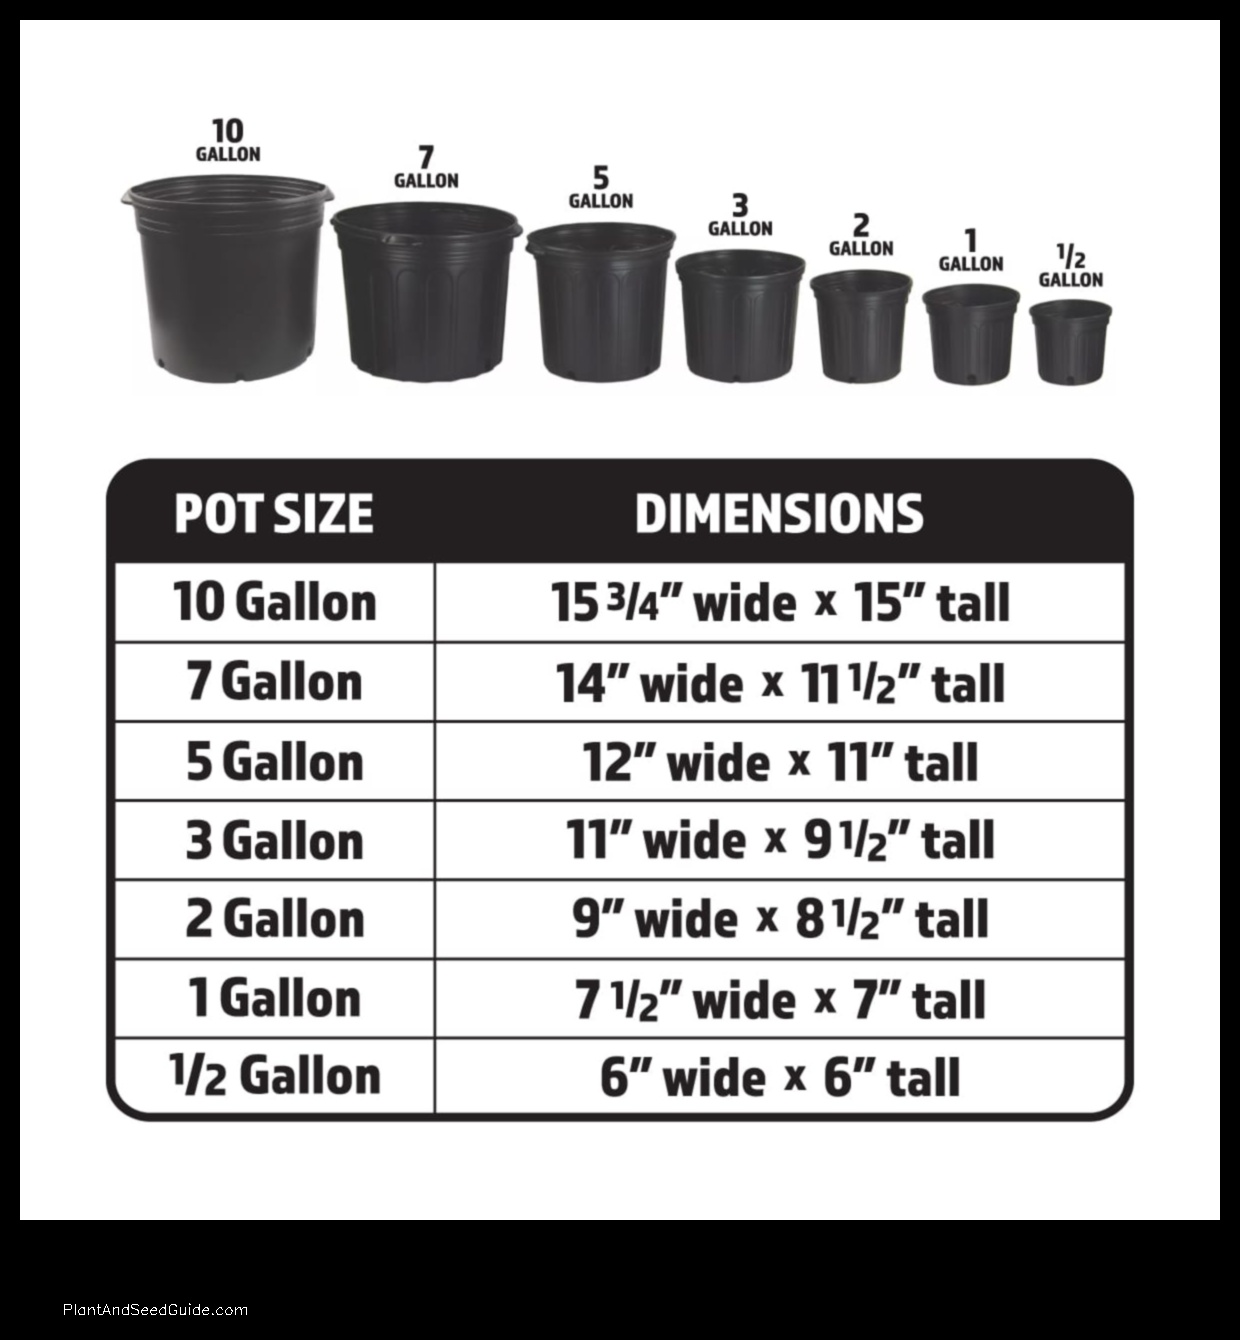 How Much Should You Charge to Plant a 3-Gallon Plant - Plant And Seed Guide